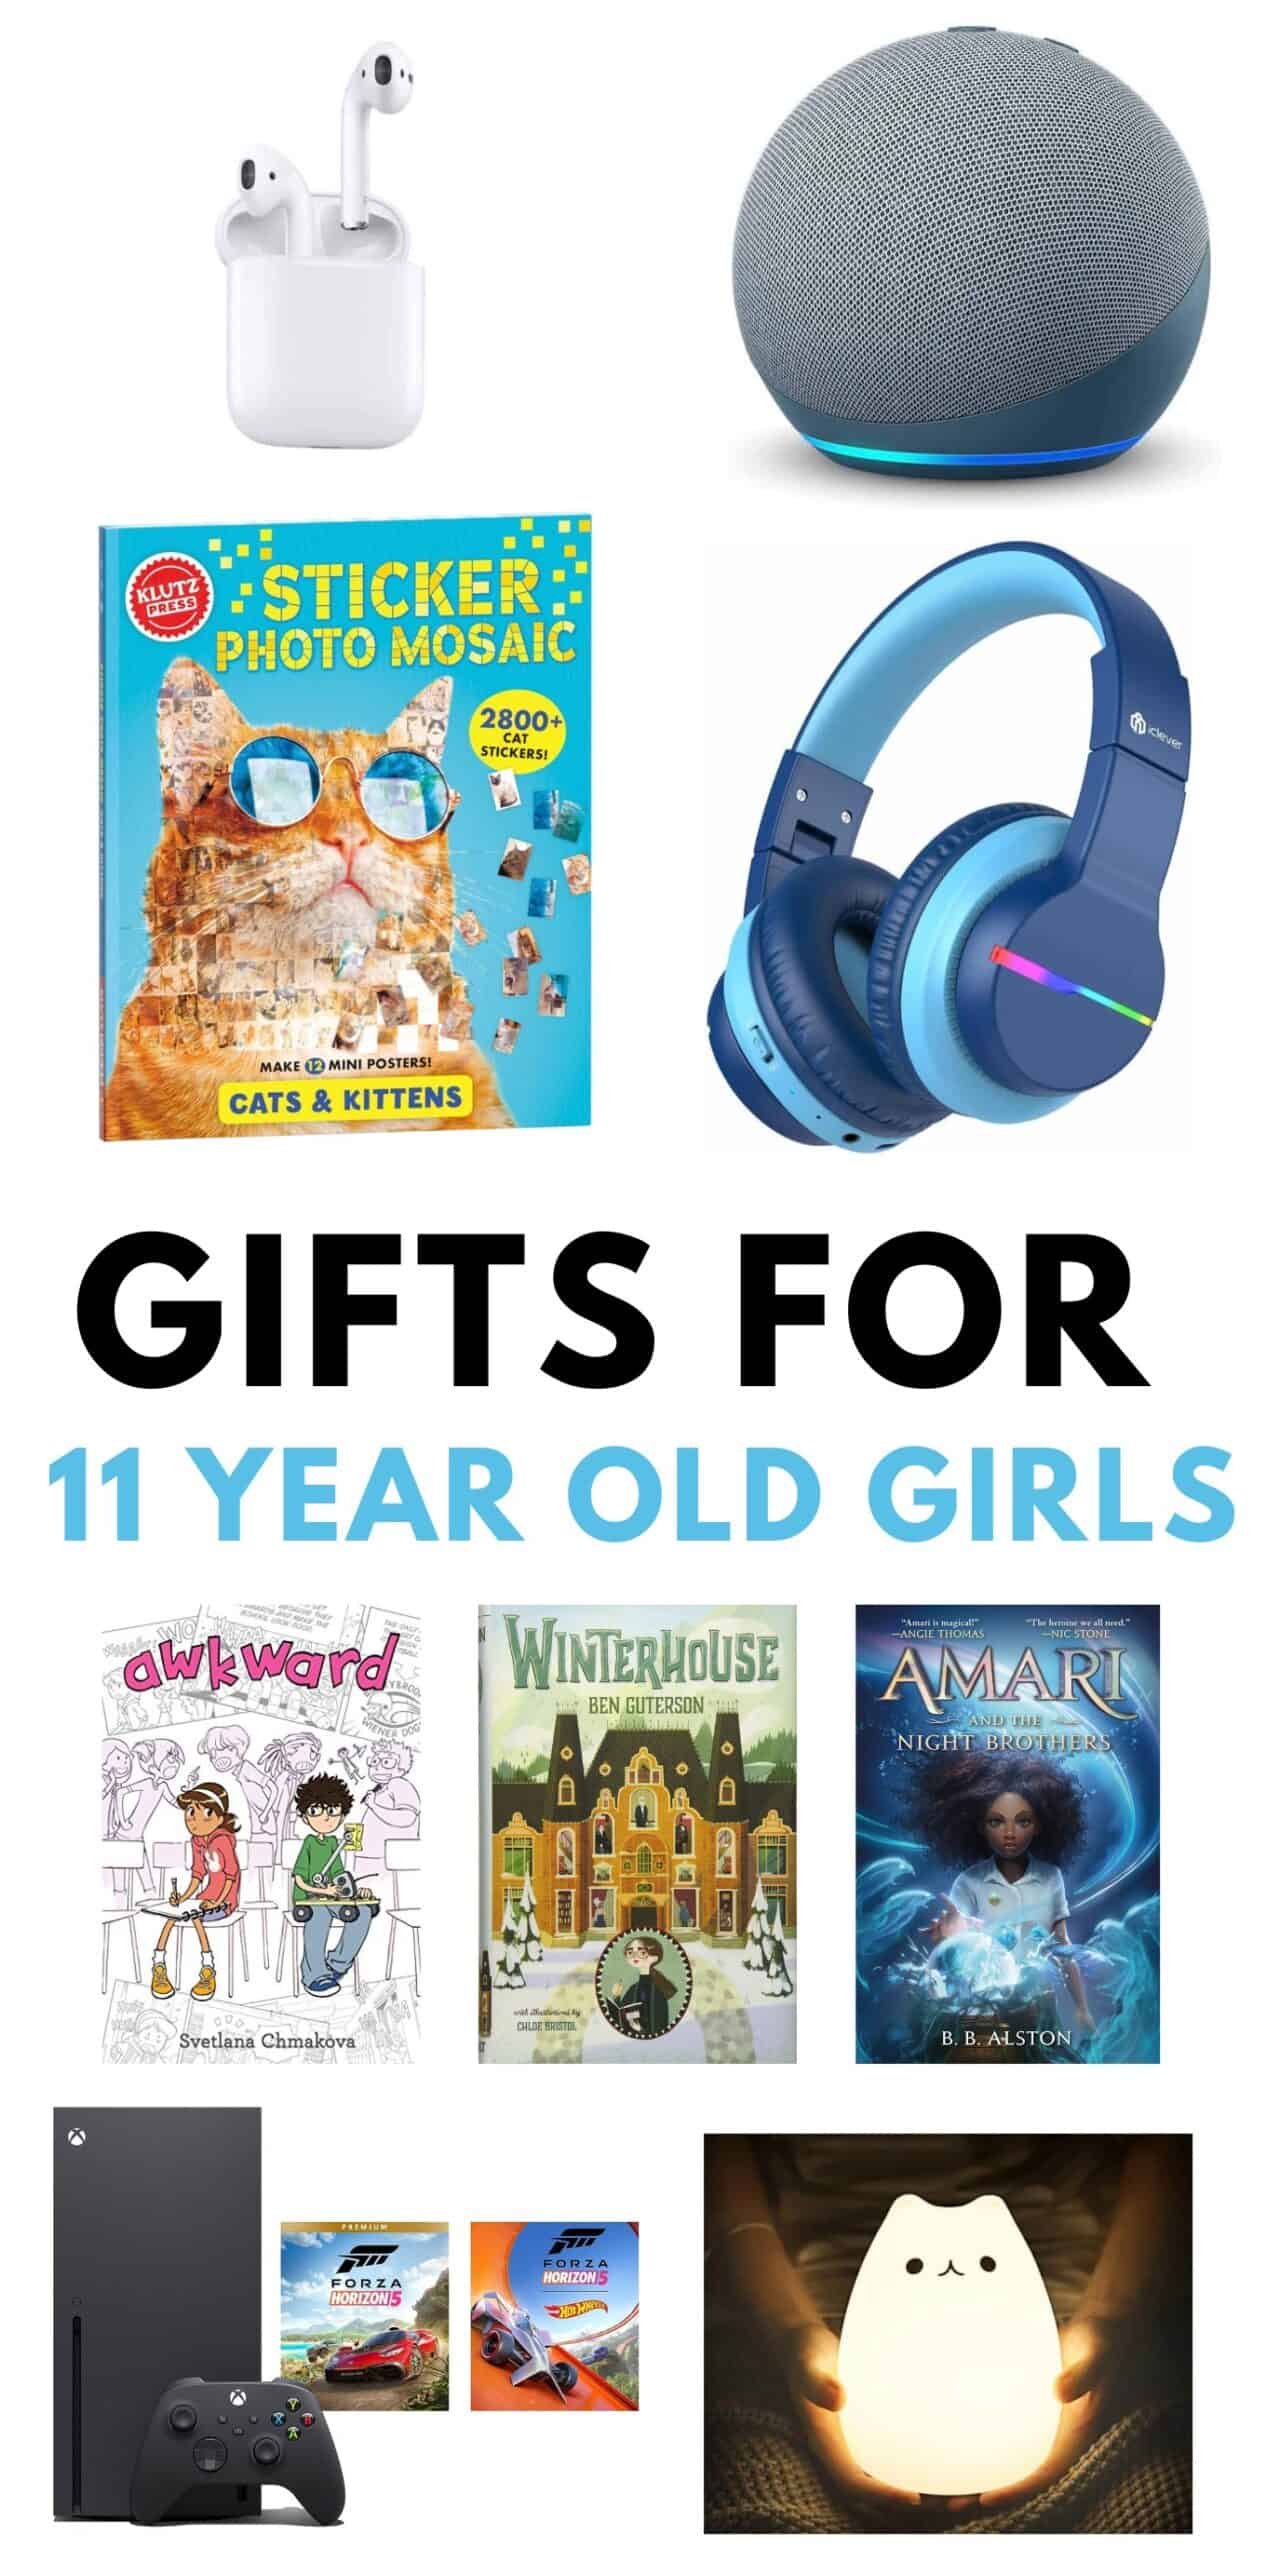 GIFTS FOR 11 YEAR OLD GIRLS